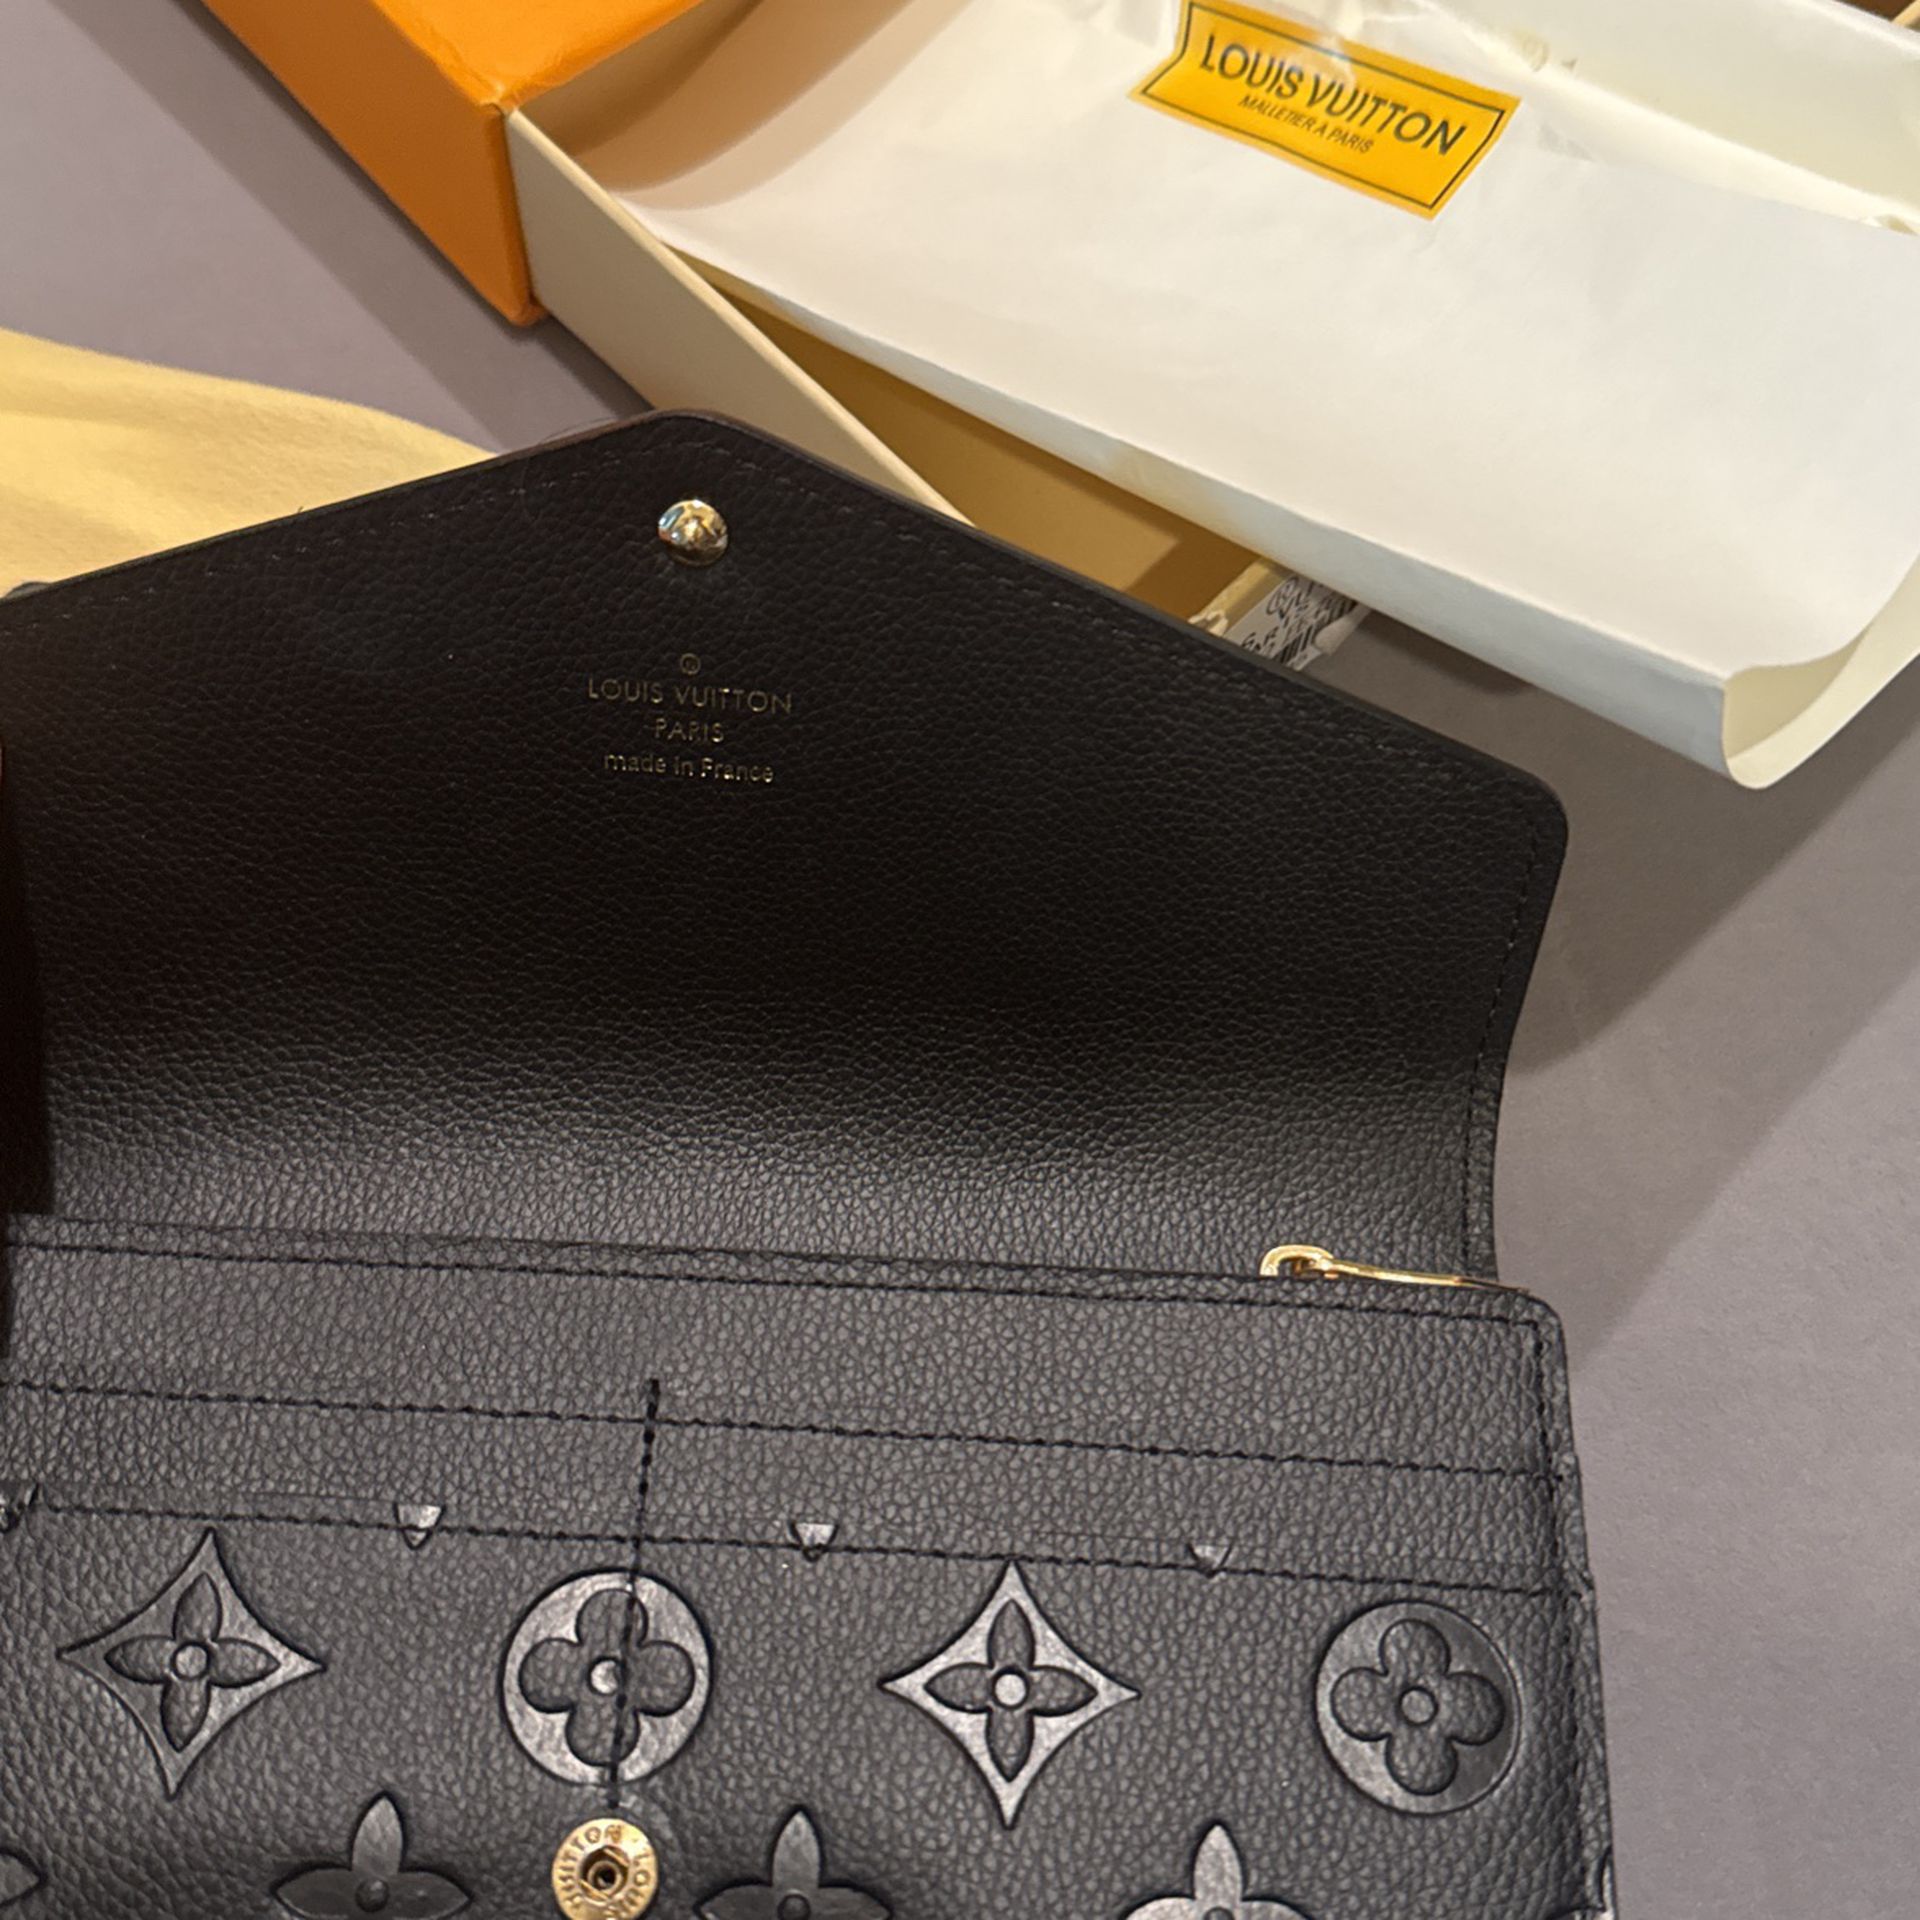 Louis Vuitton Wallet With Box And Bag 